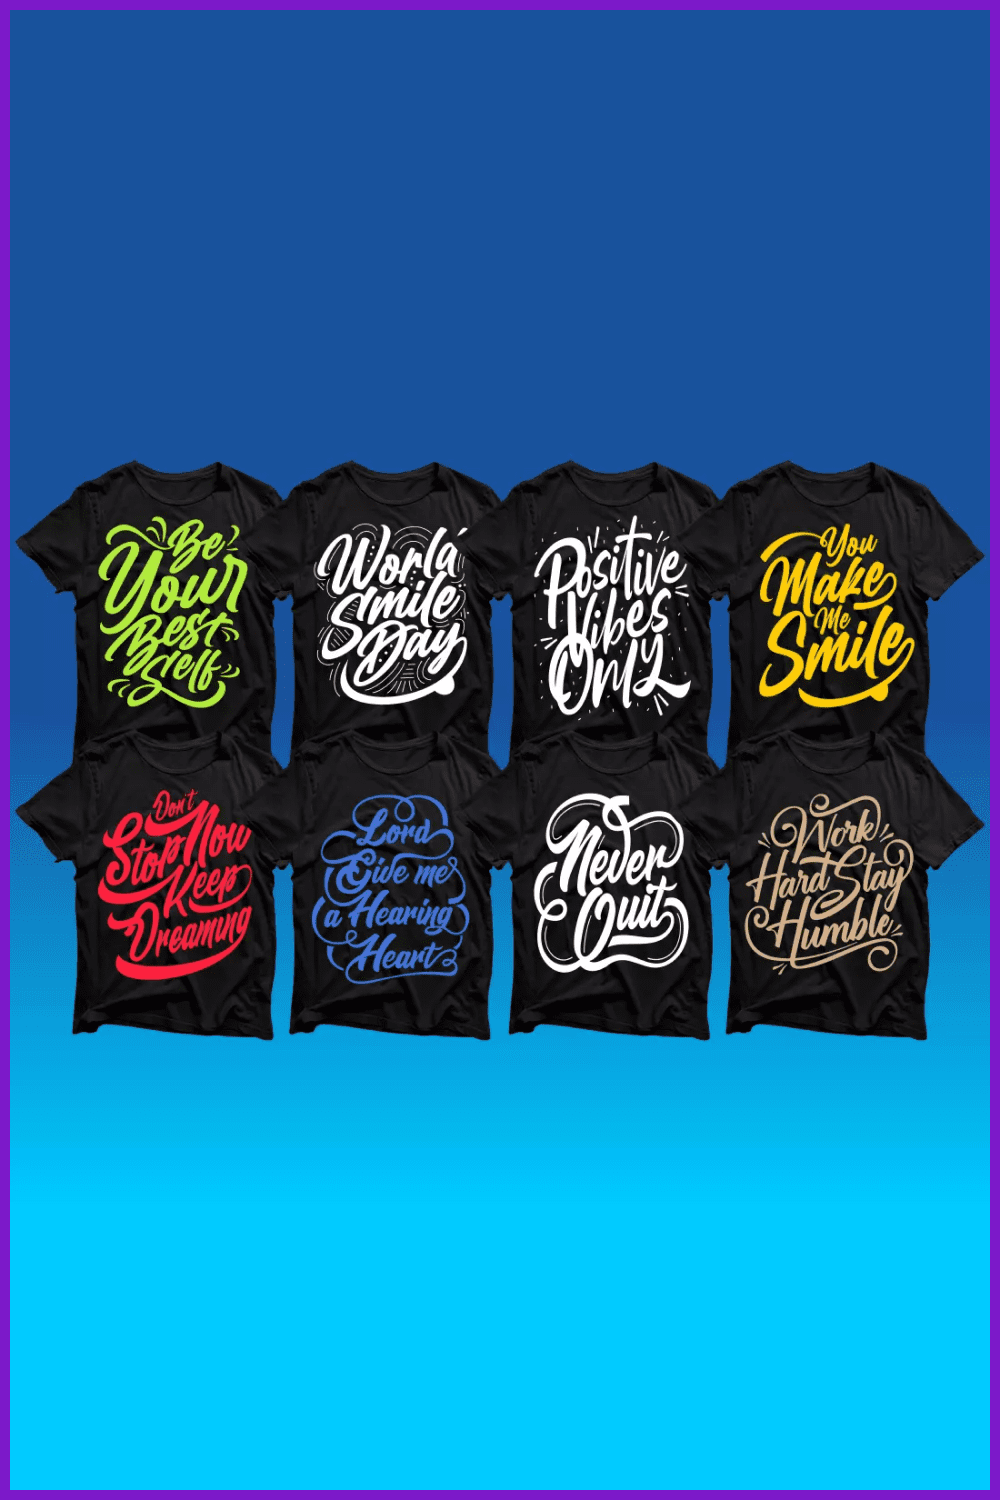 Black t-shirts with different colored calligraphic text on them.